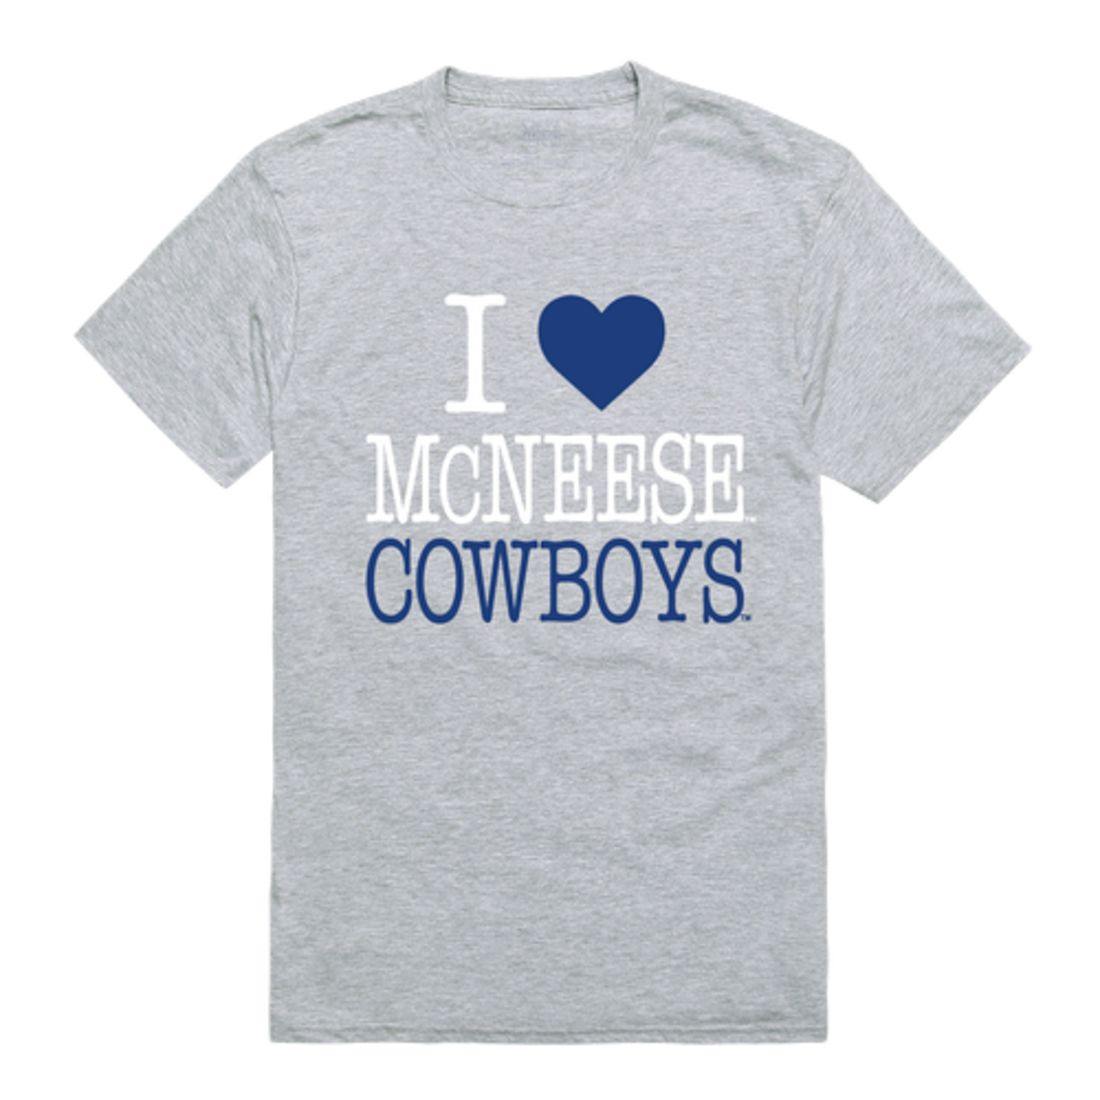 I Love McNeese State University Cowboys and Cowgirls T-Shirt-Campus-Wardrobe